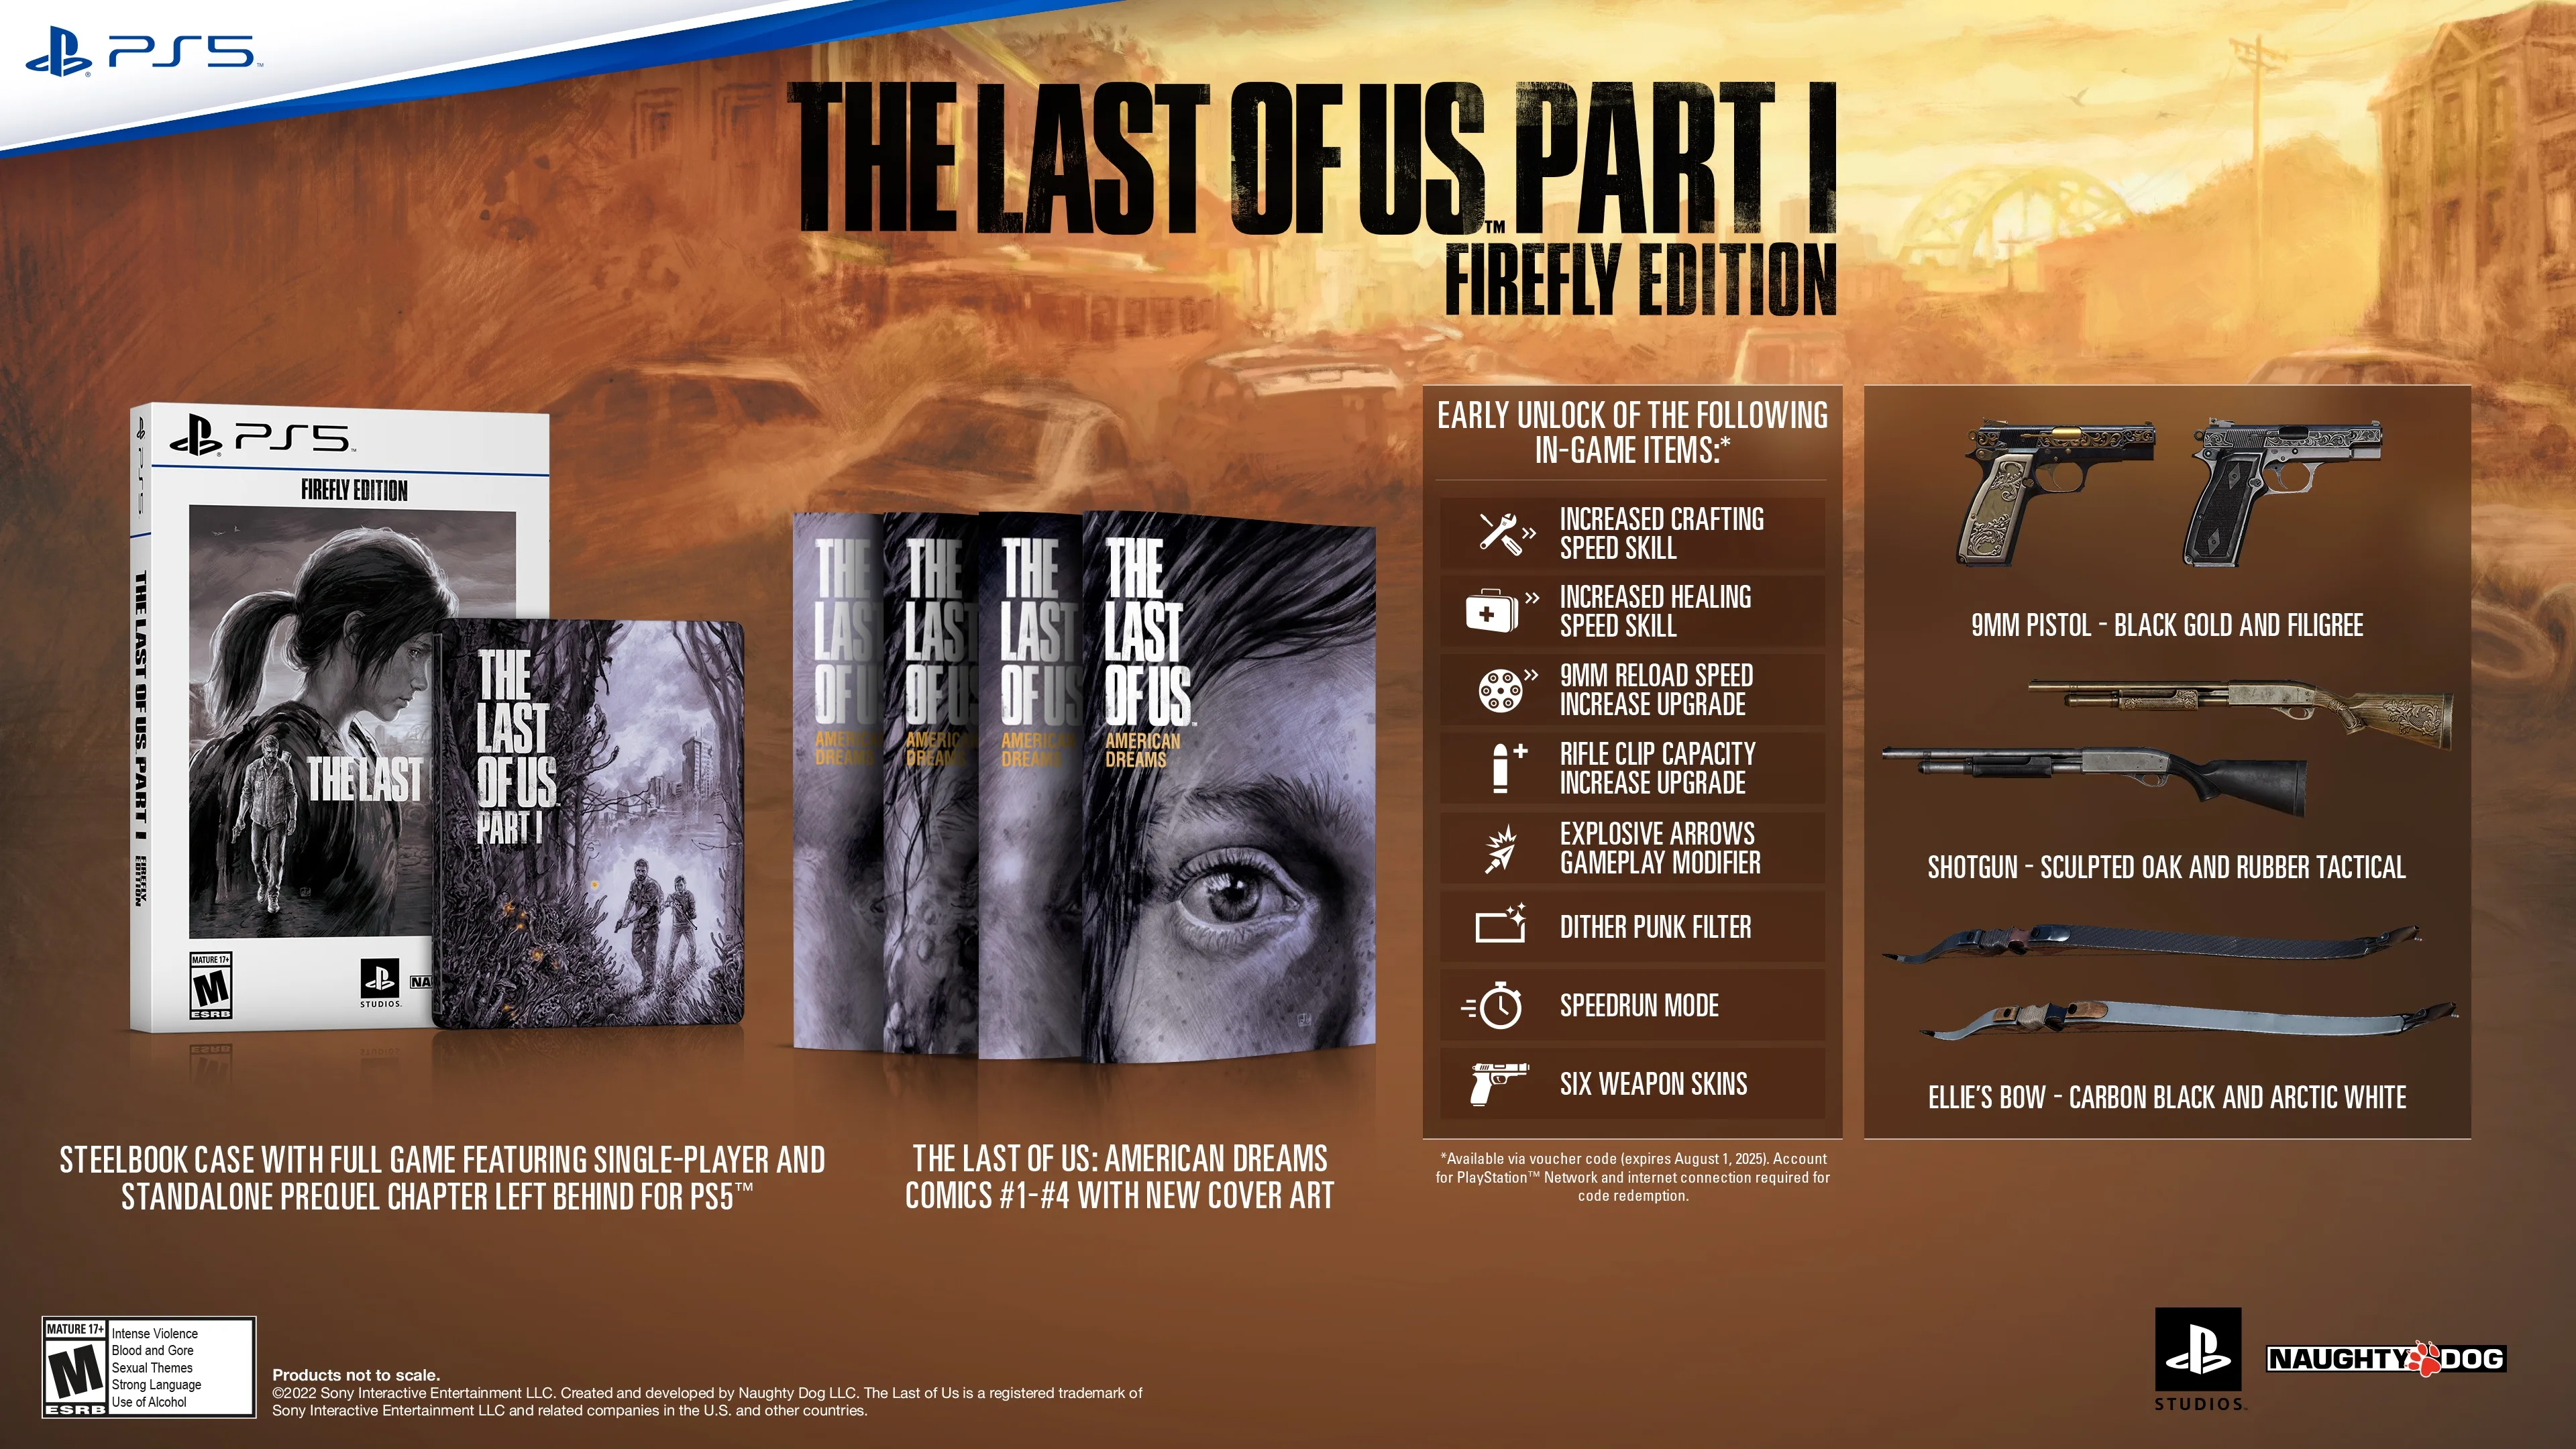 The Last of Us Part 1 will be available not only on PC, but will